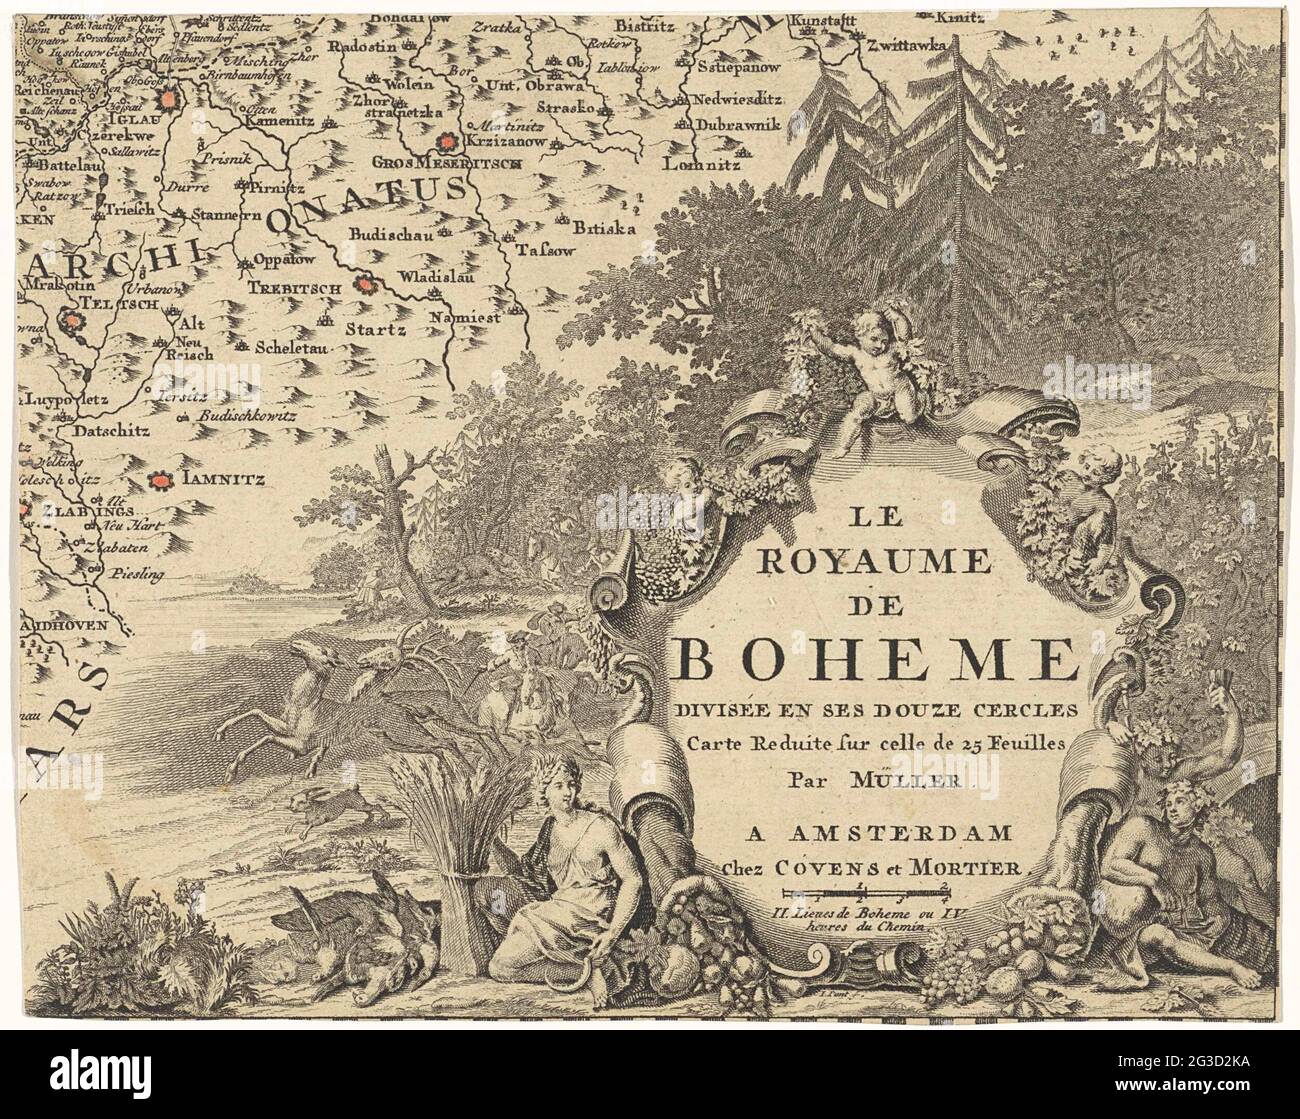 Fragment of a bohemia map; Le Royaume de boheme (...). A richly decorated cartouche with the title in French, decorated with horns of plenty, leaves and putti. The cartouche is flanked by Ceres and Bachus. In the background in a bunch of men hunt deer and wild boar. On the left a fragment of the Bohemia map. Stock Photo